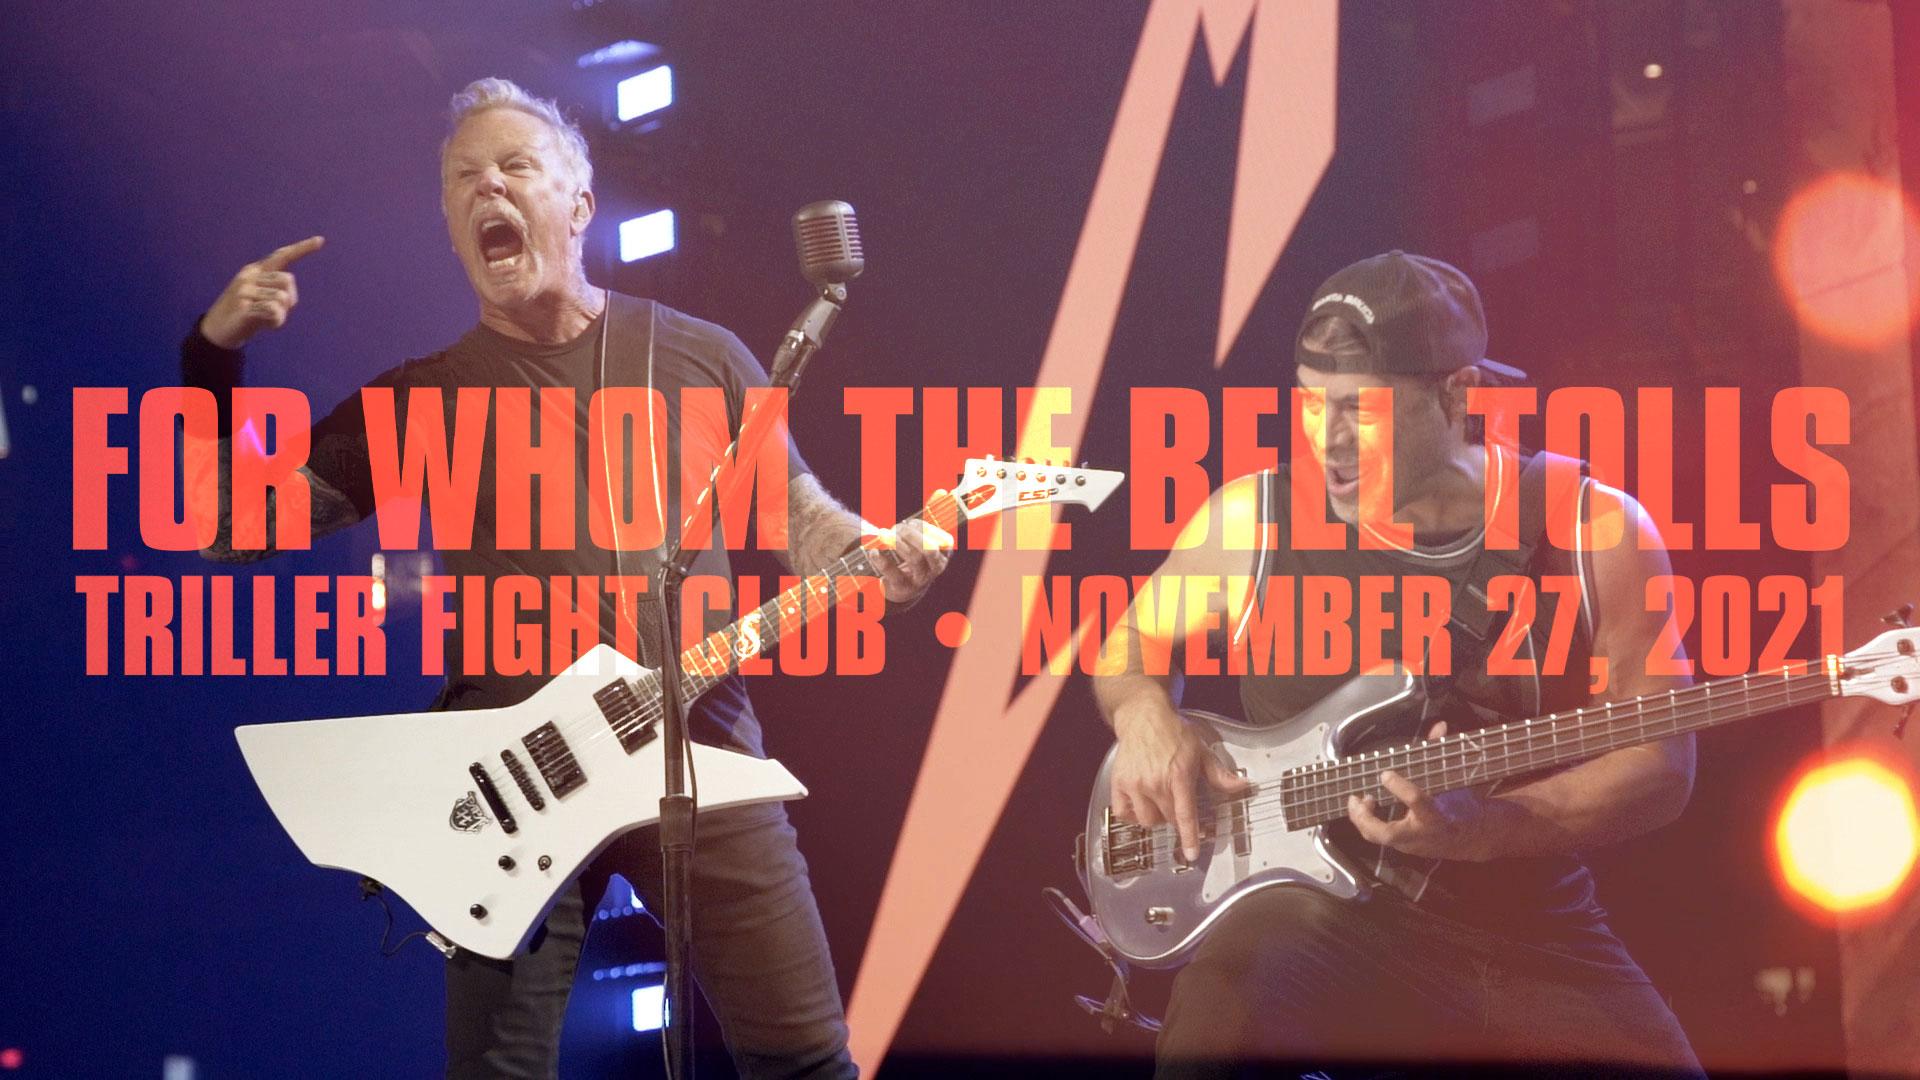 Watch Metallica perform "For Whom the Bell Tolls" at Triller Fight Club at AT&T Stadium in Arlington, TX on November 27, 2021.